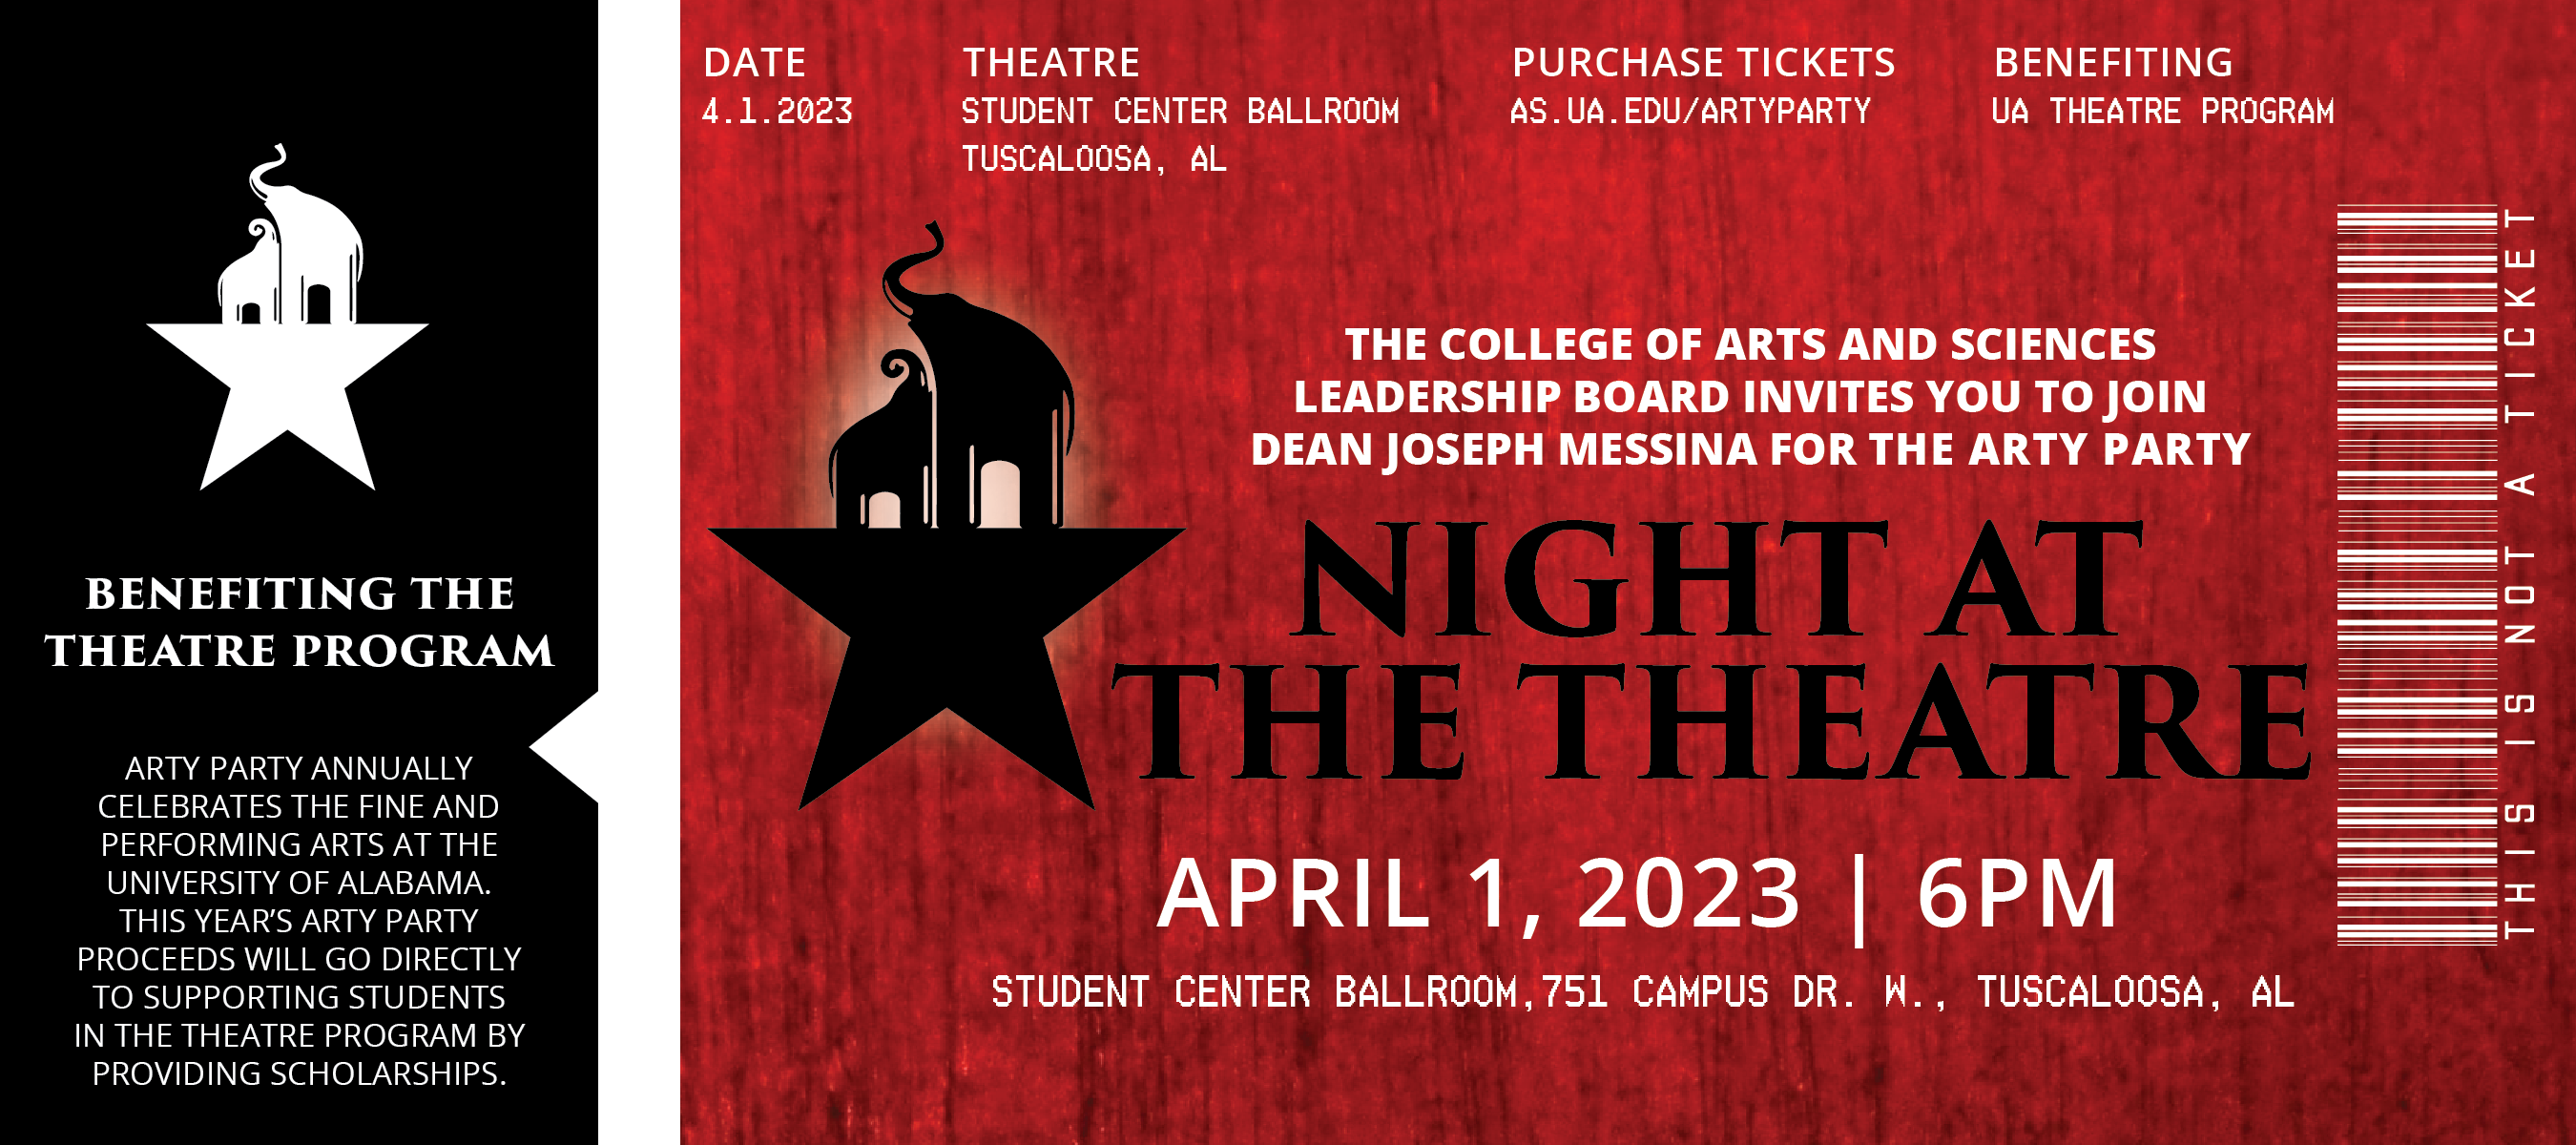 A Night at the Theatre, the 2023 Arty Party event benefiting the UA theatre program, April 1, 2023